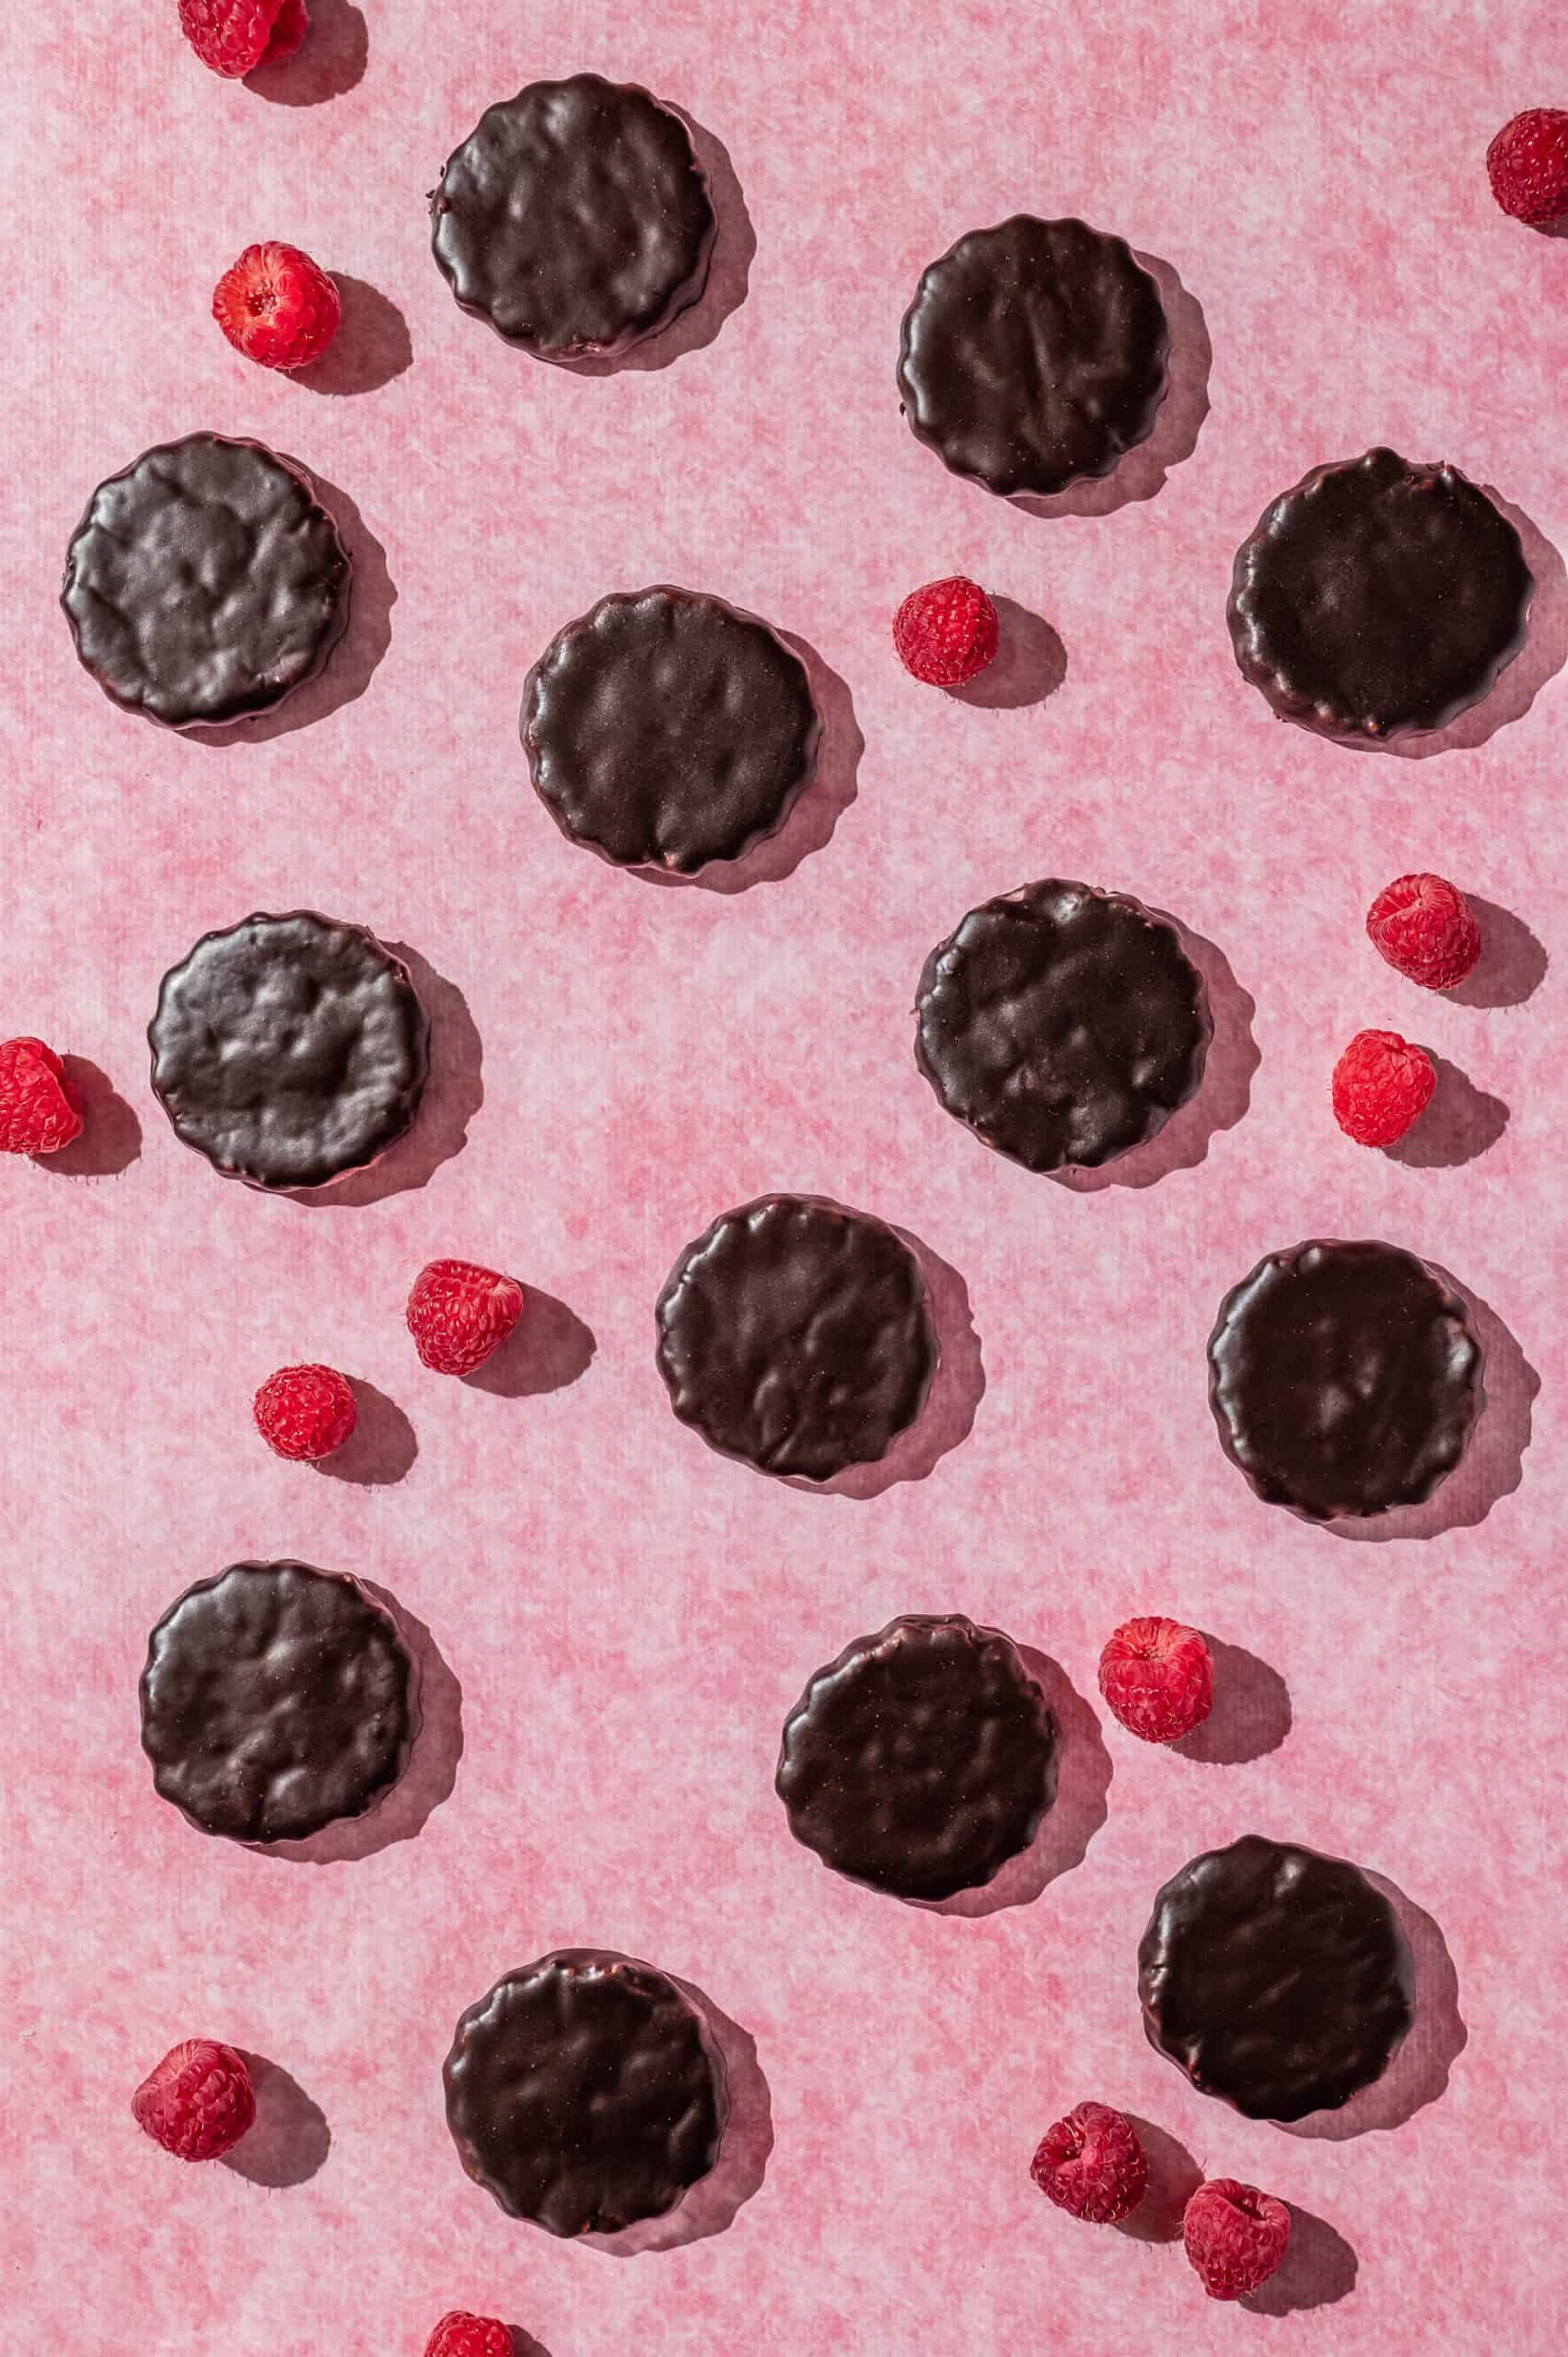 raspberry rally cookies and fresh raspberries spread out on a pink textured background